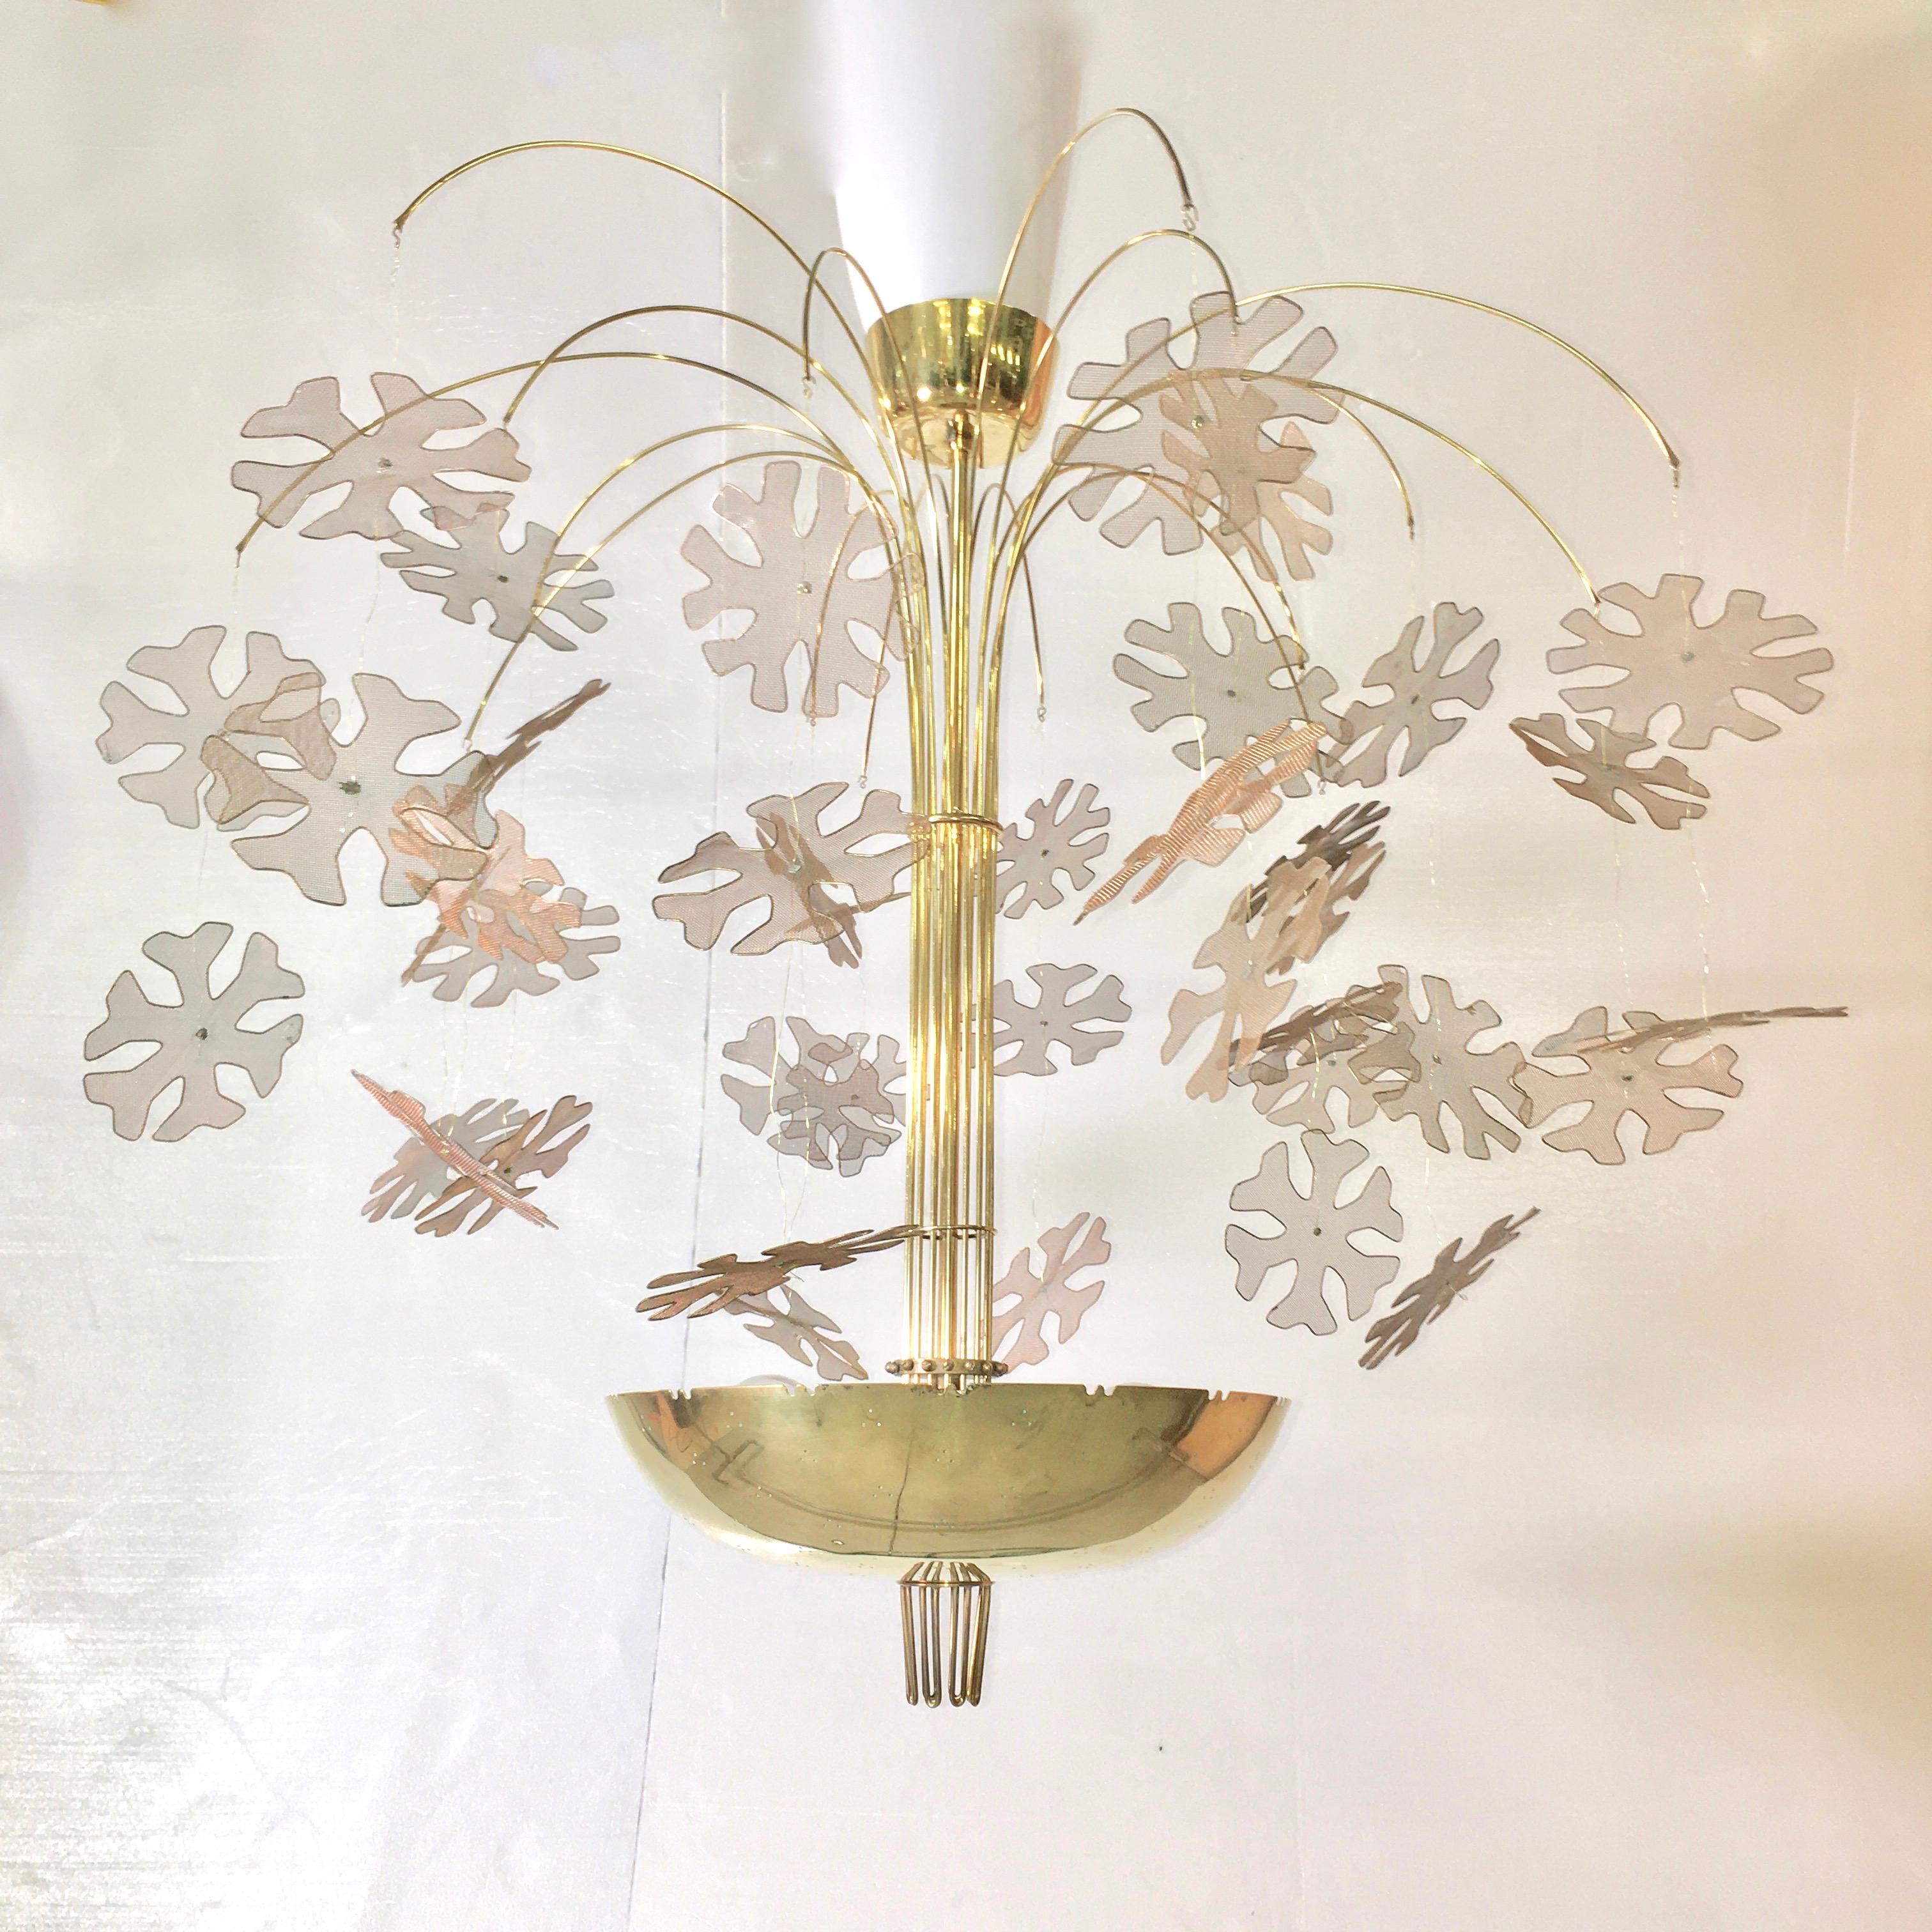 Original Model 10105/9041 Fantasia brass chandelier designed by Paavo Tynell and produced by Taito Oy Ab, Finland, 1950. 
Purchased through The Finland House showroom, 39-41 East 50th Street, New York, NY.
Pierced polished brass bowl with